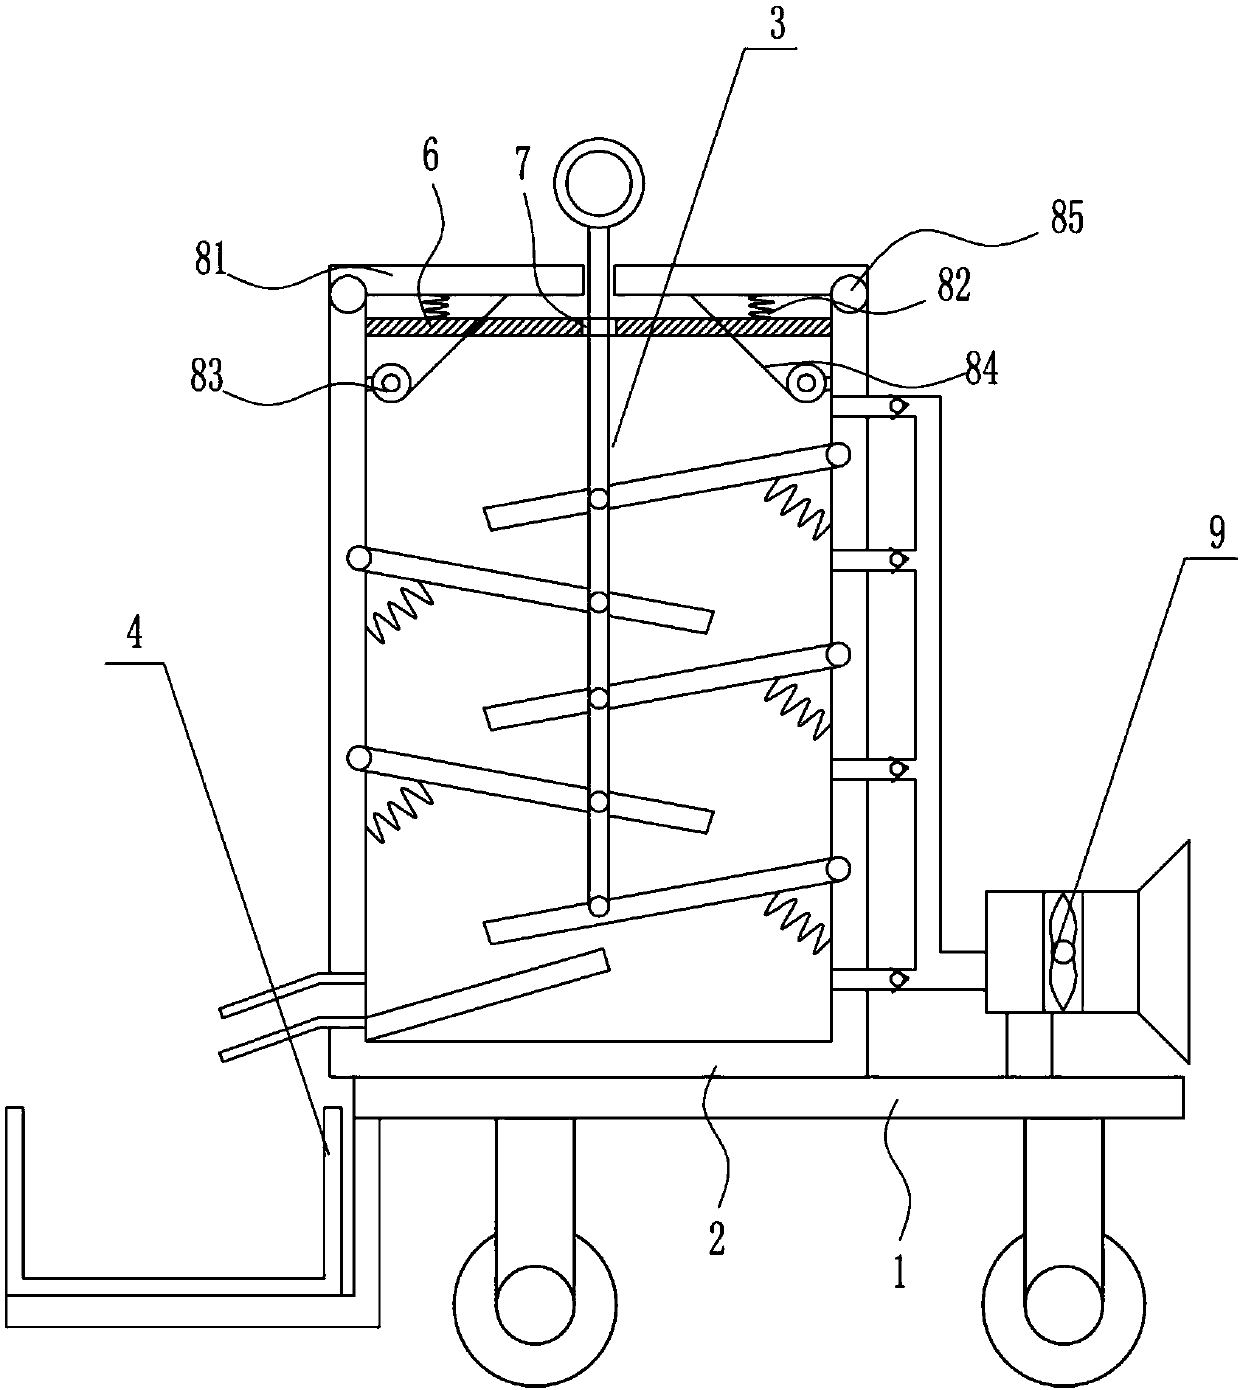 Layered drying device for wine processing raw materials